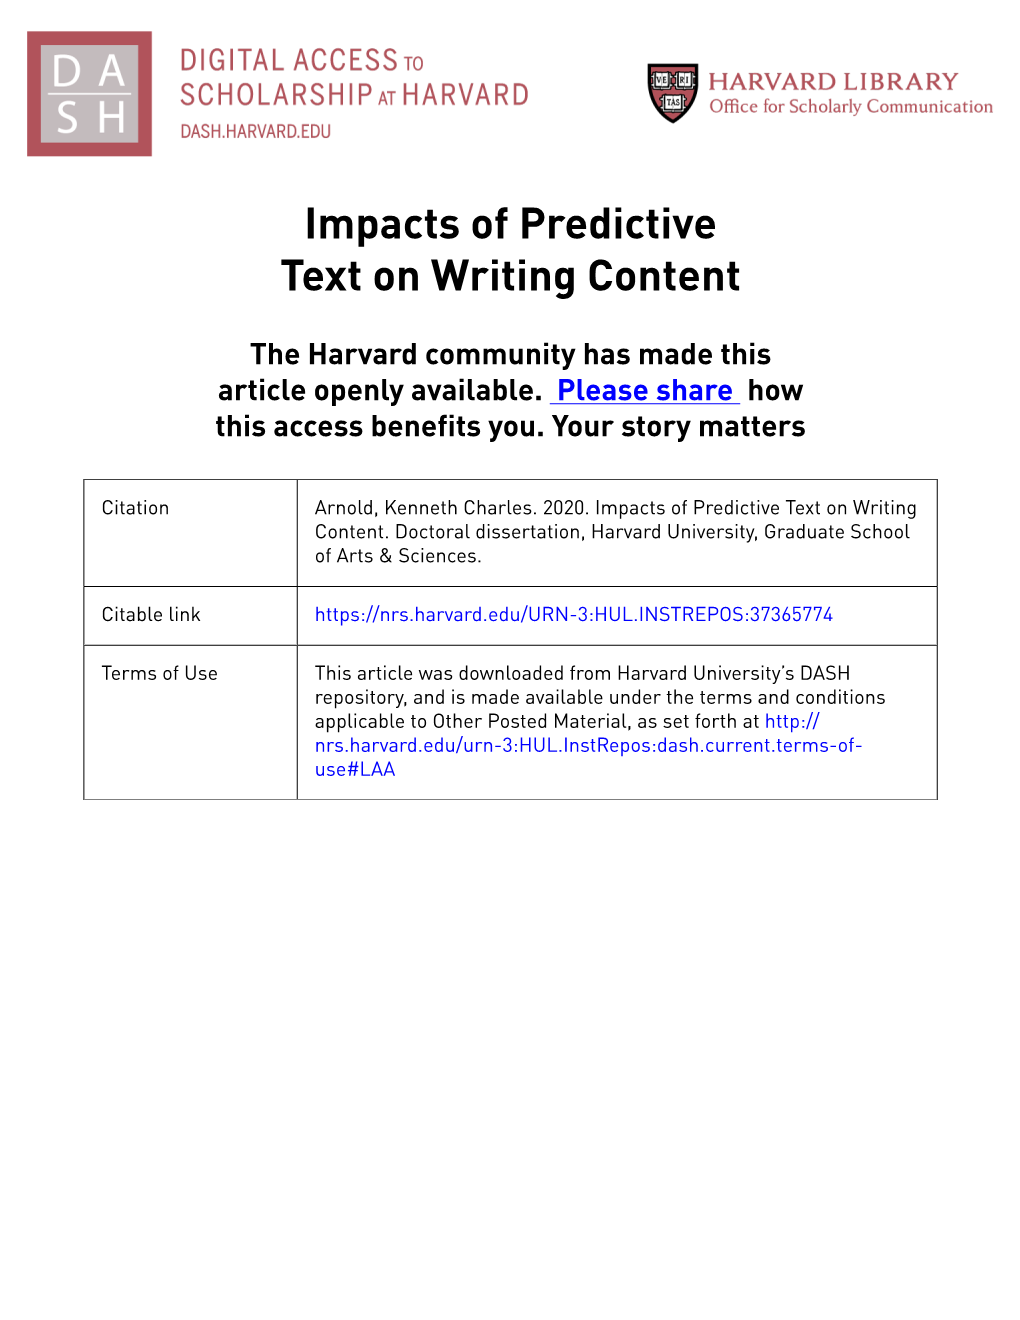 Impacts of Predictive Text on Writing Content